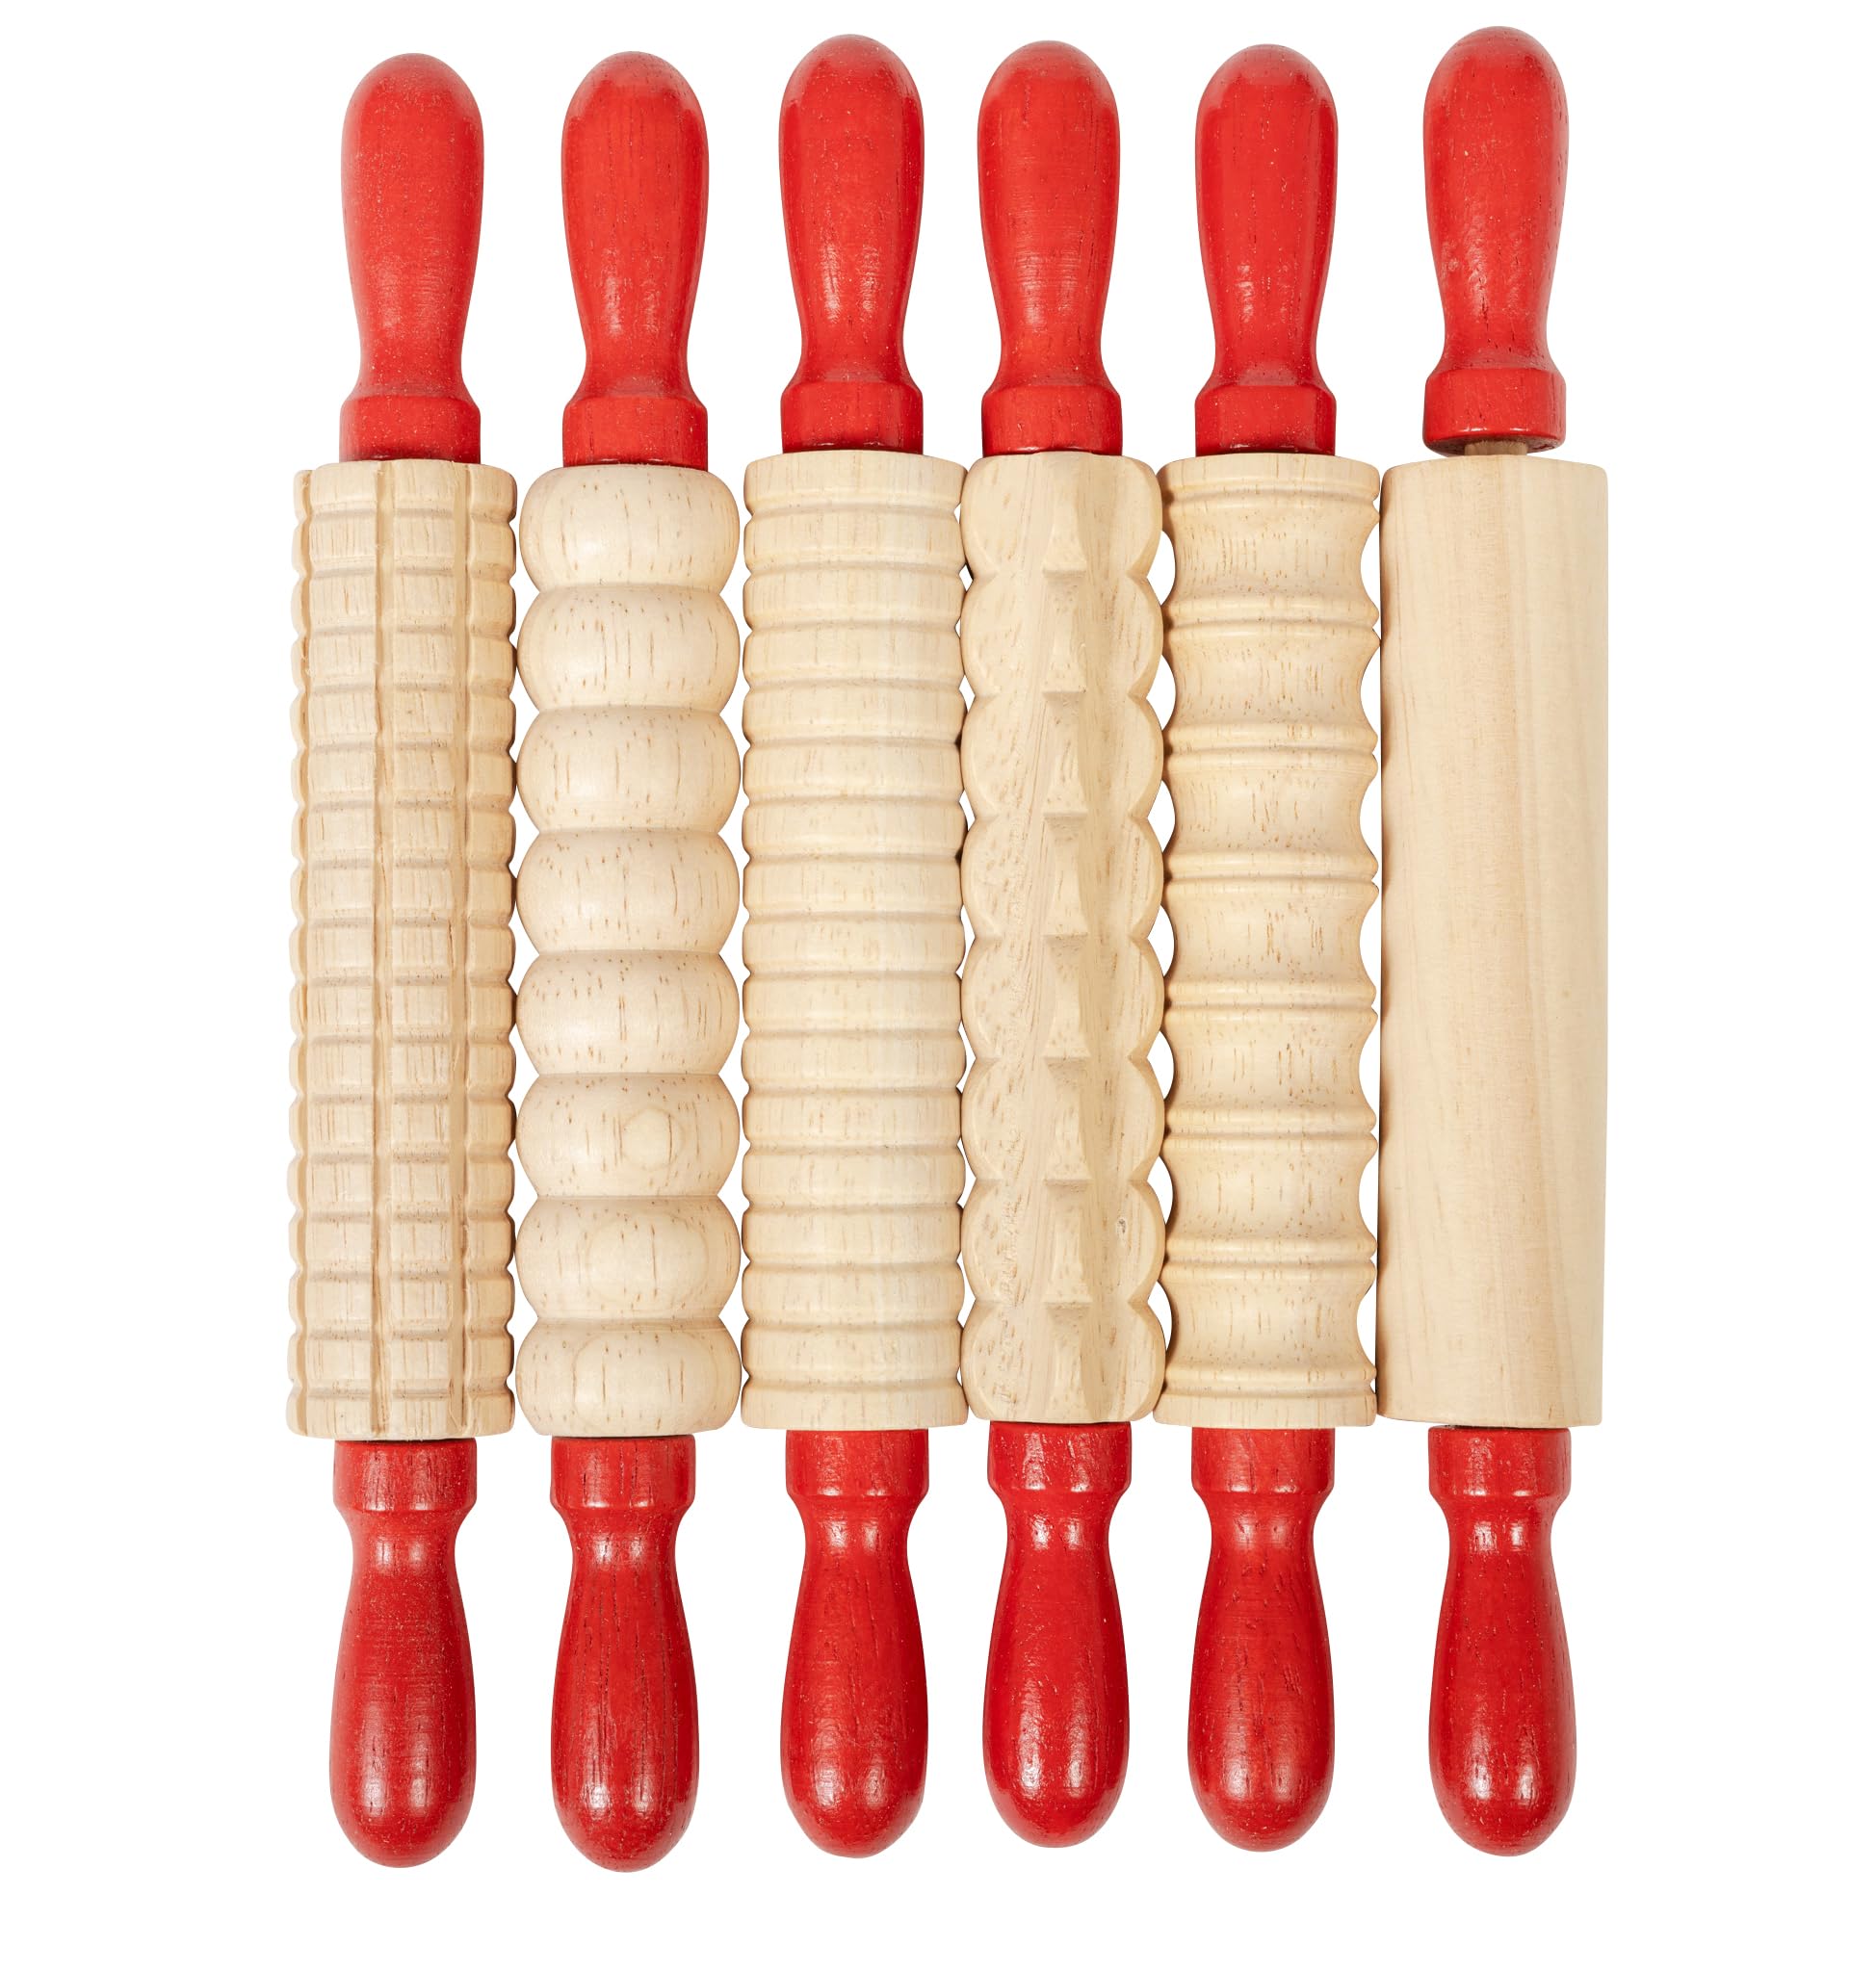 READY 2 LEARN Mini Textured Wooden Rolling Pins - Set of 6-7.25 inches - Turning Handles - Rollers for Kids' Dough, Crafts, Imaginative Play